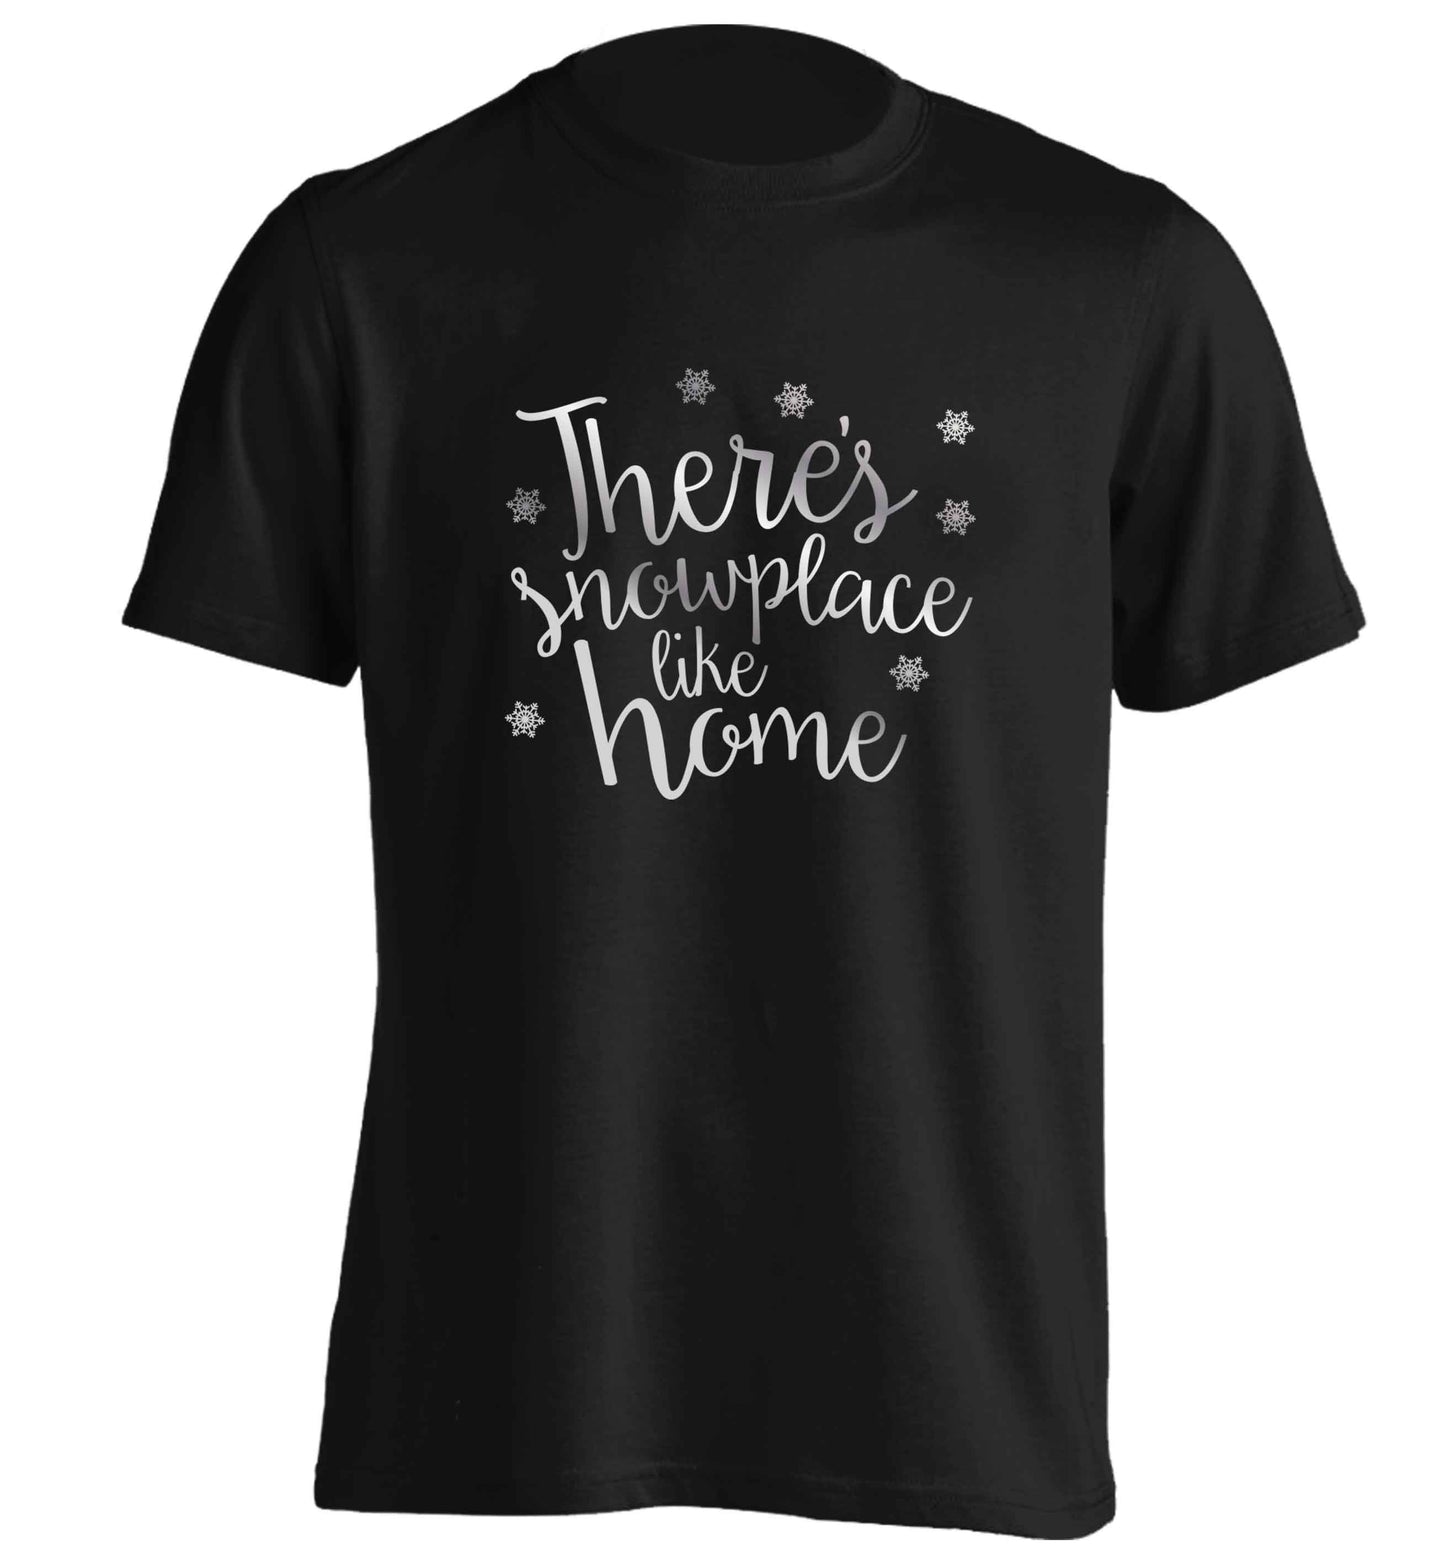 There's snowplace like home - metallic silver adults unisex black Tshirt 2XL